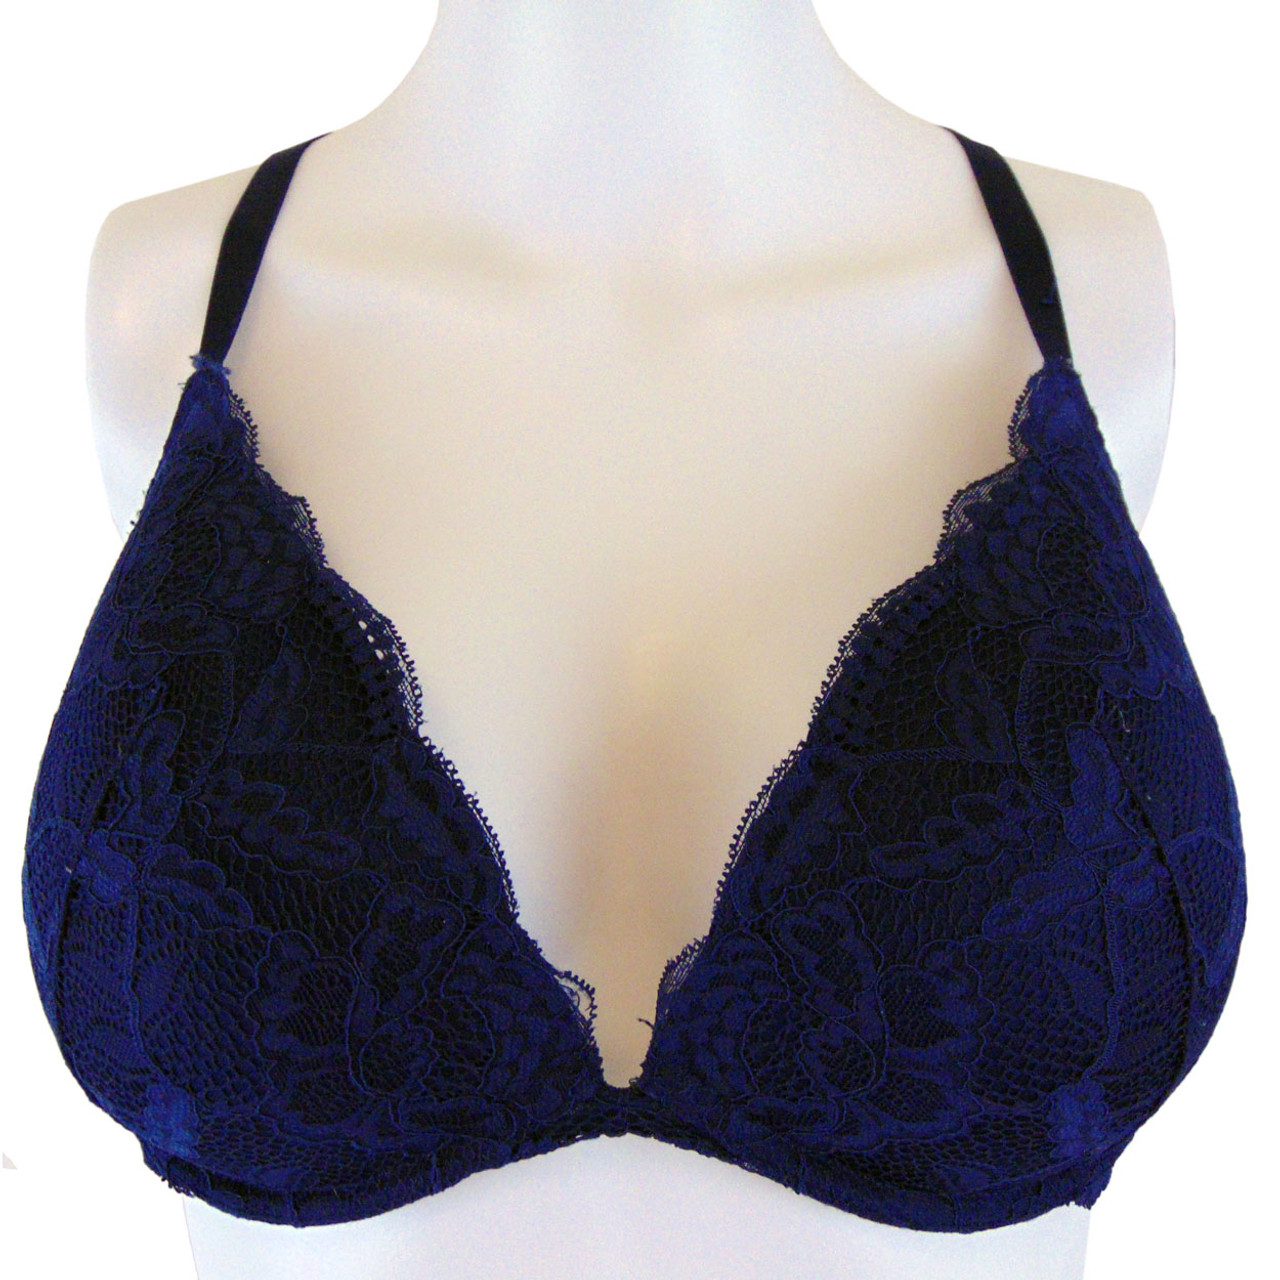 Obsession Navy Blue Lace and Mesh Underwire Bra - Size 36DD